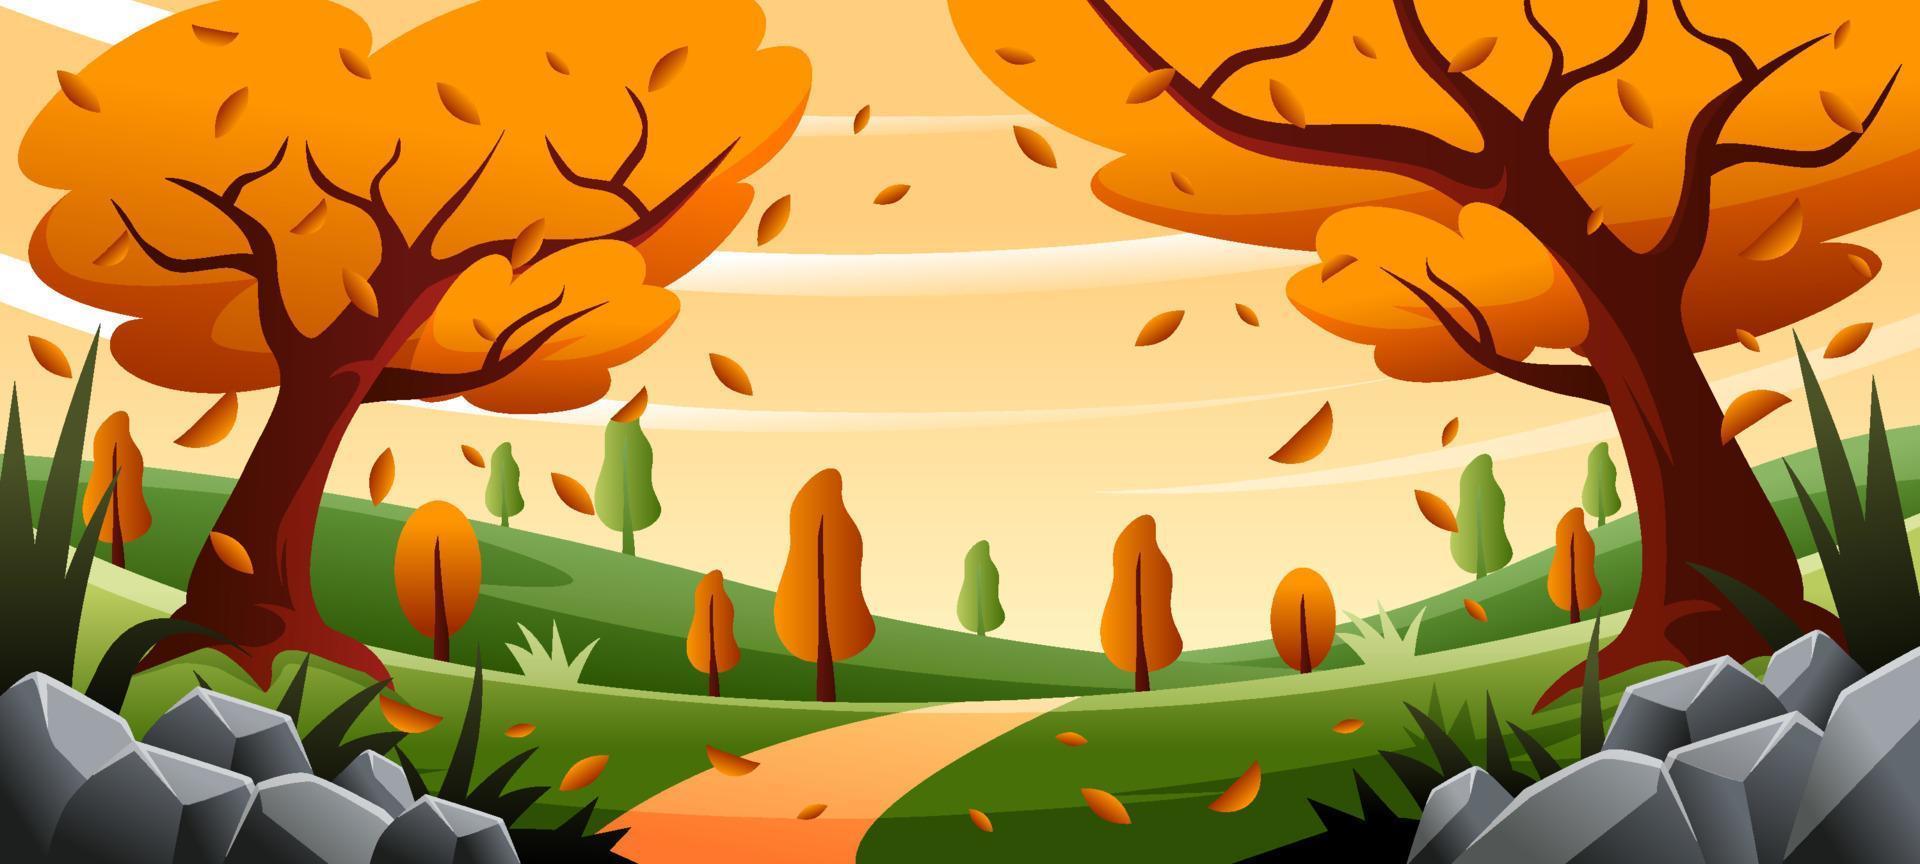 Landscape in Autumn with Fallen Leaves vector